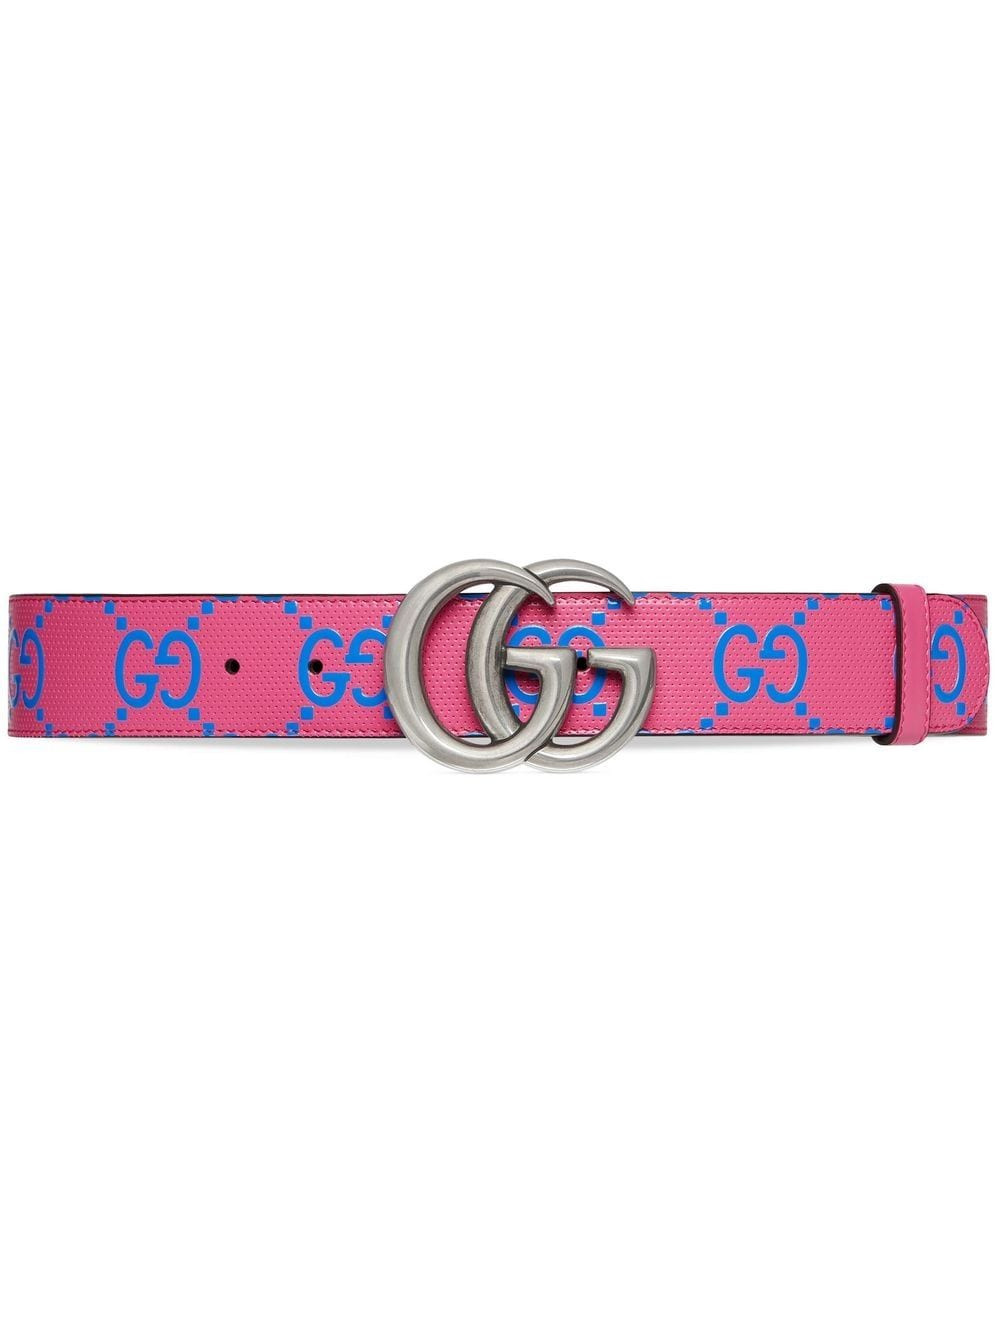 Gucci Gg marmont leather belt